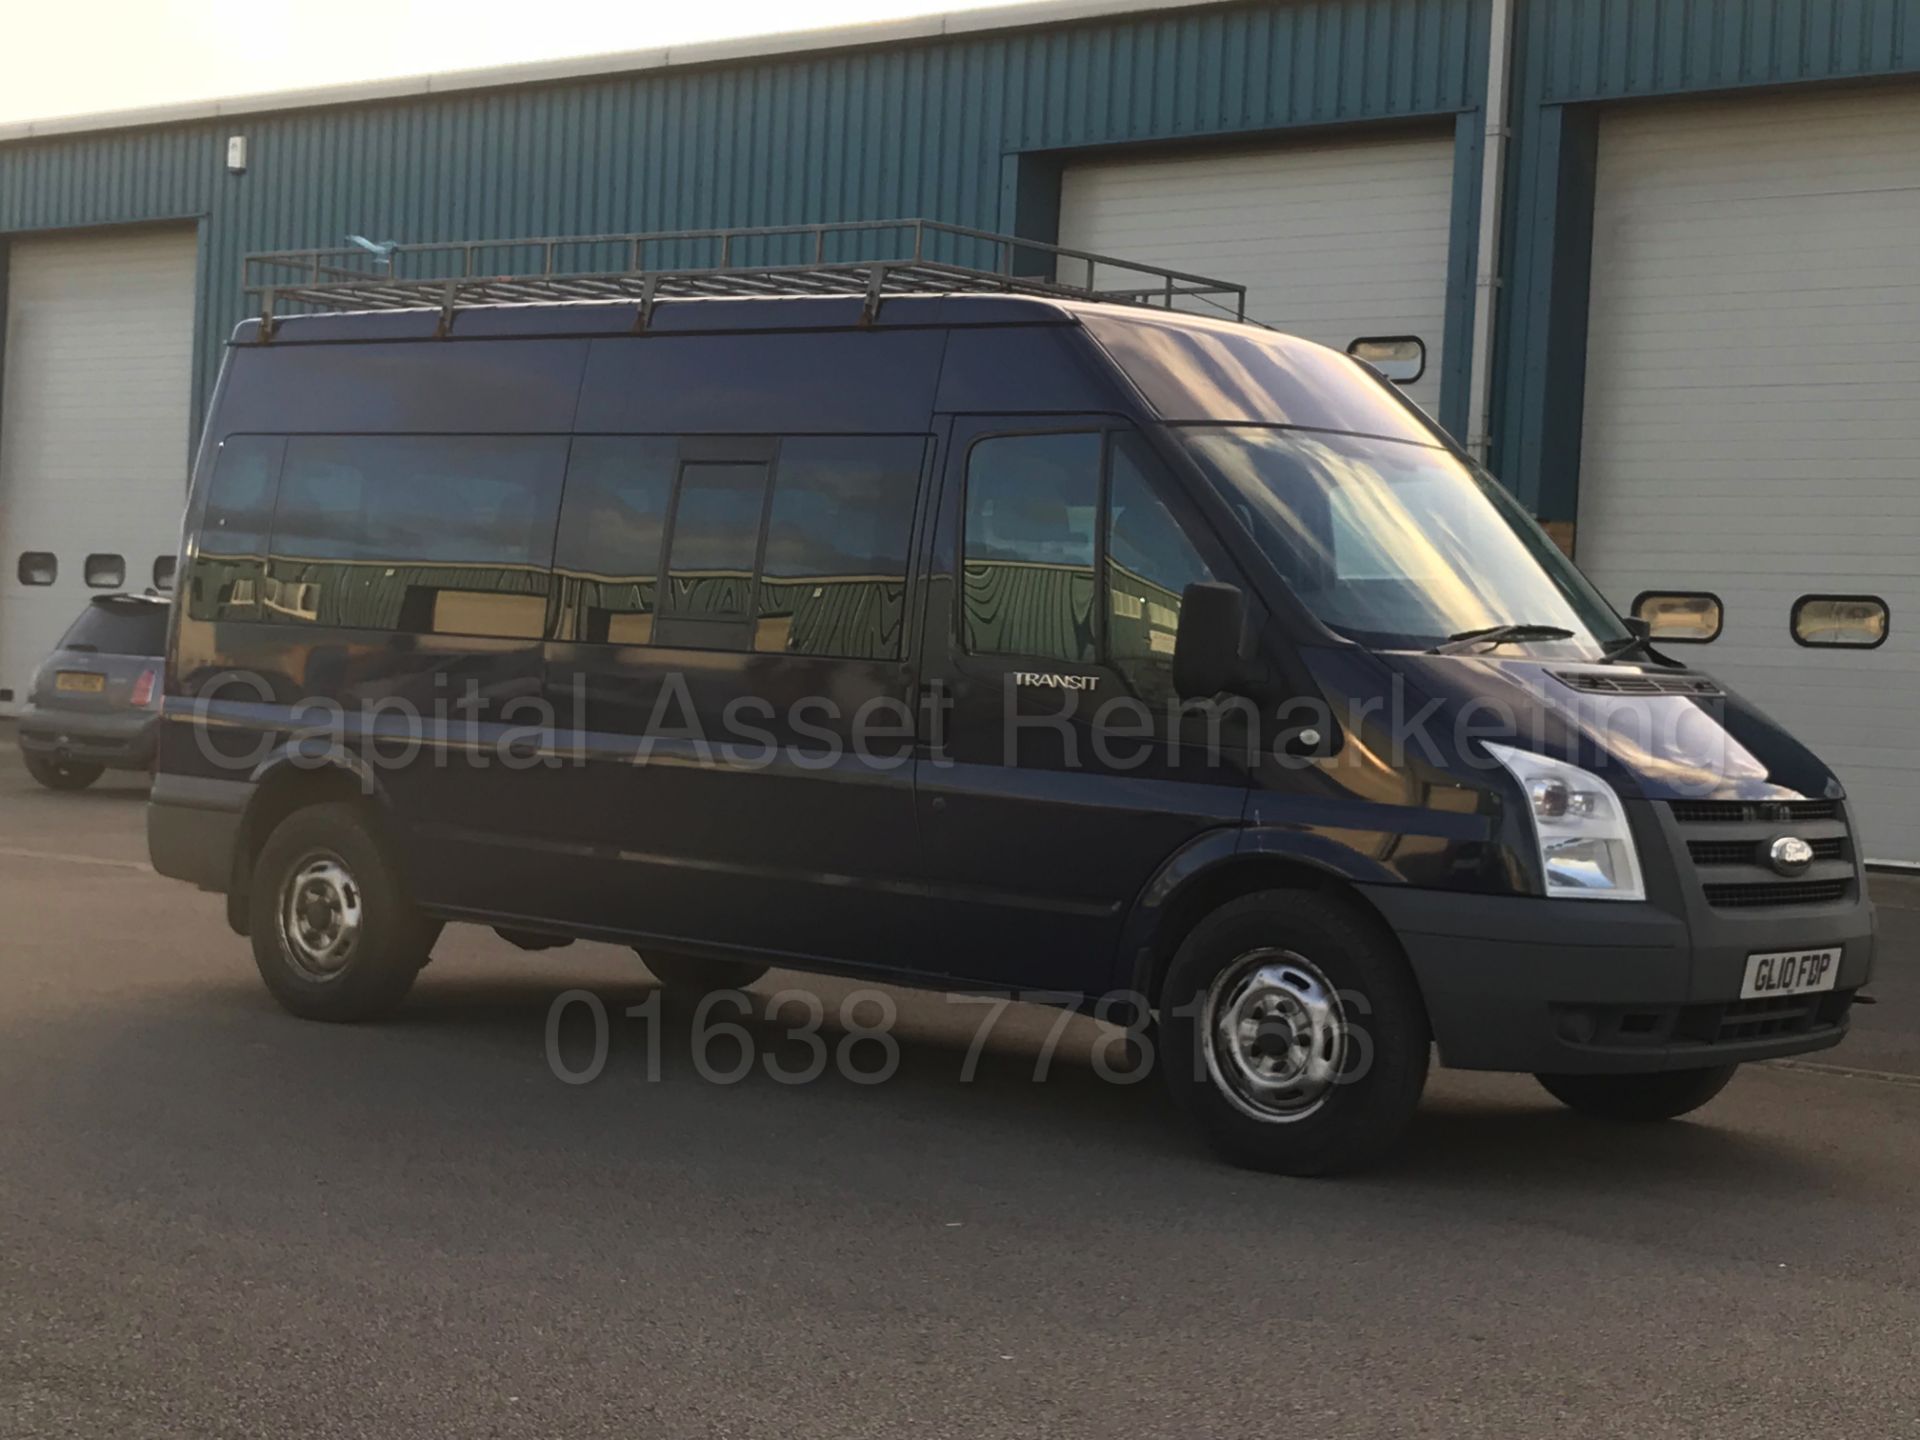 FORD TRANSIT 100 T350 '15 SEATER MINI-BUS' (2010 - 10 REG) '2.4 TDCI - 100 BHP - 5 SPEED' *AIR CON* - Image 2 of 28